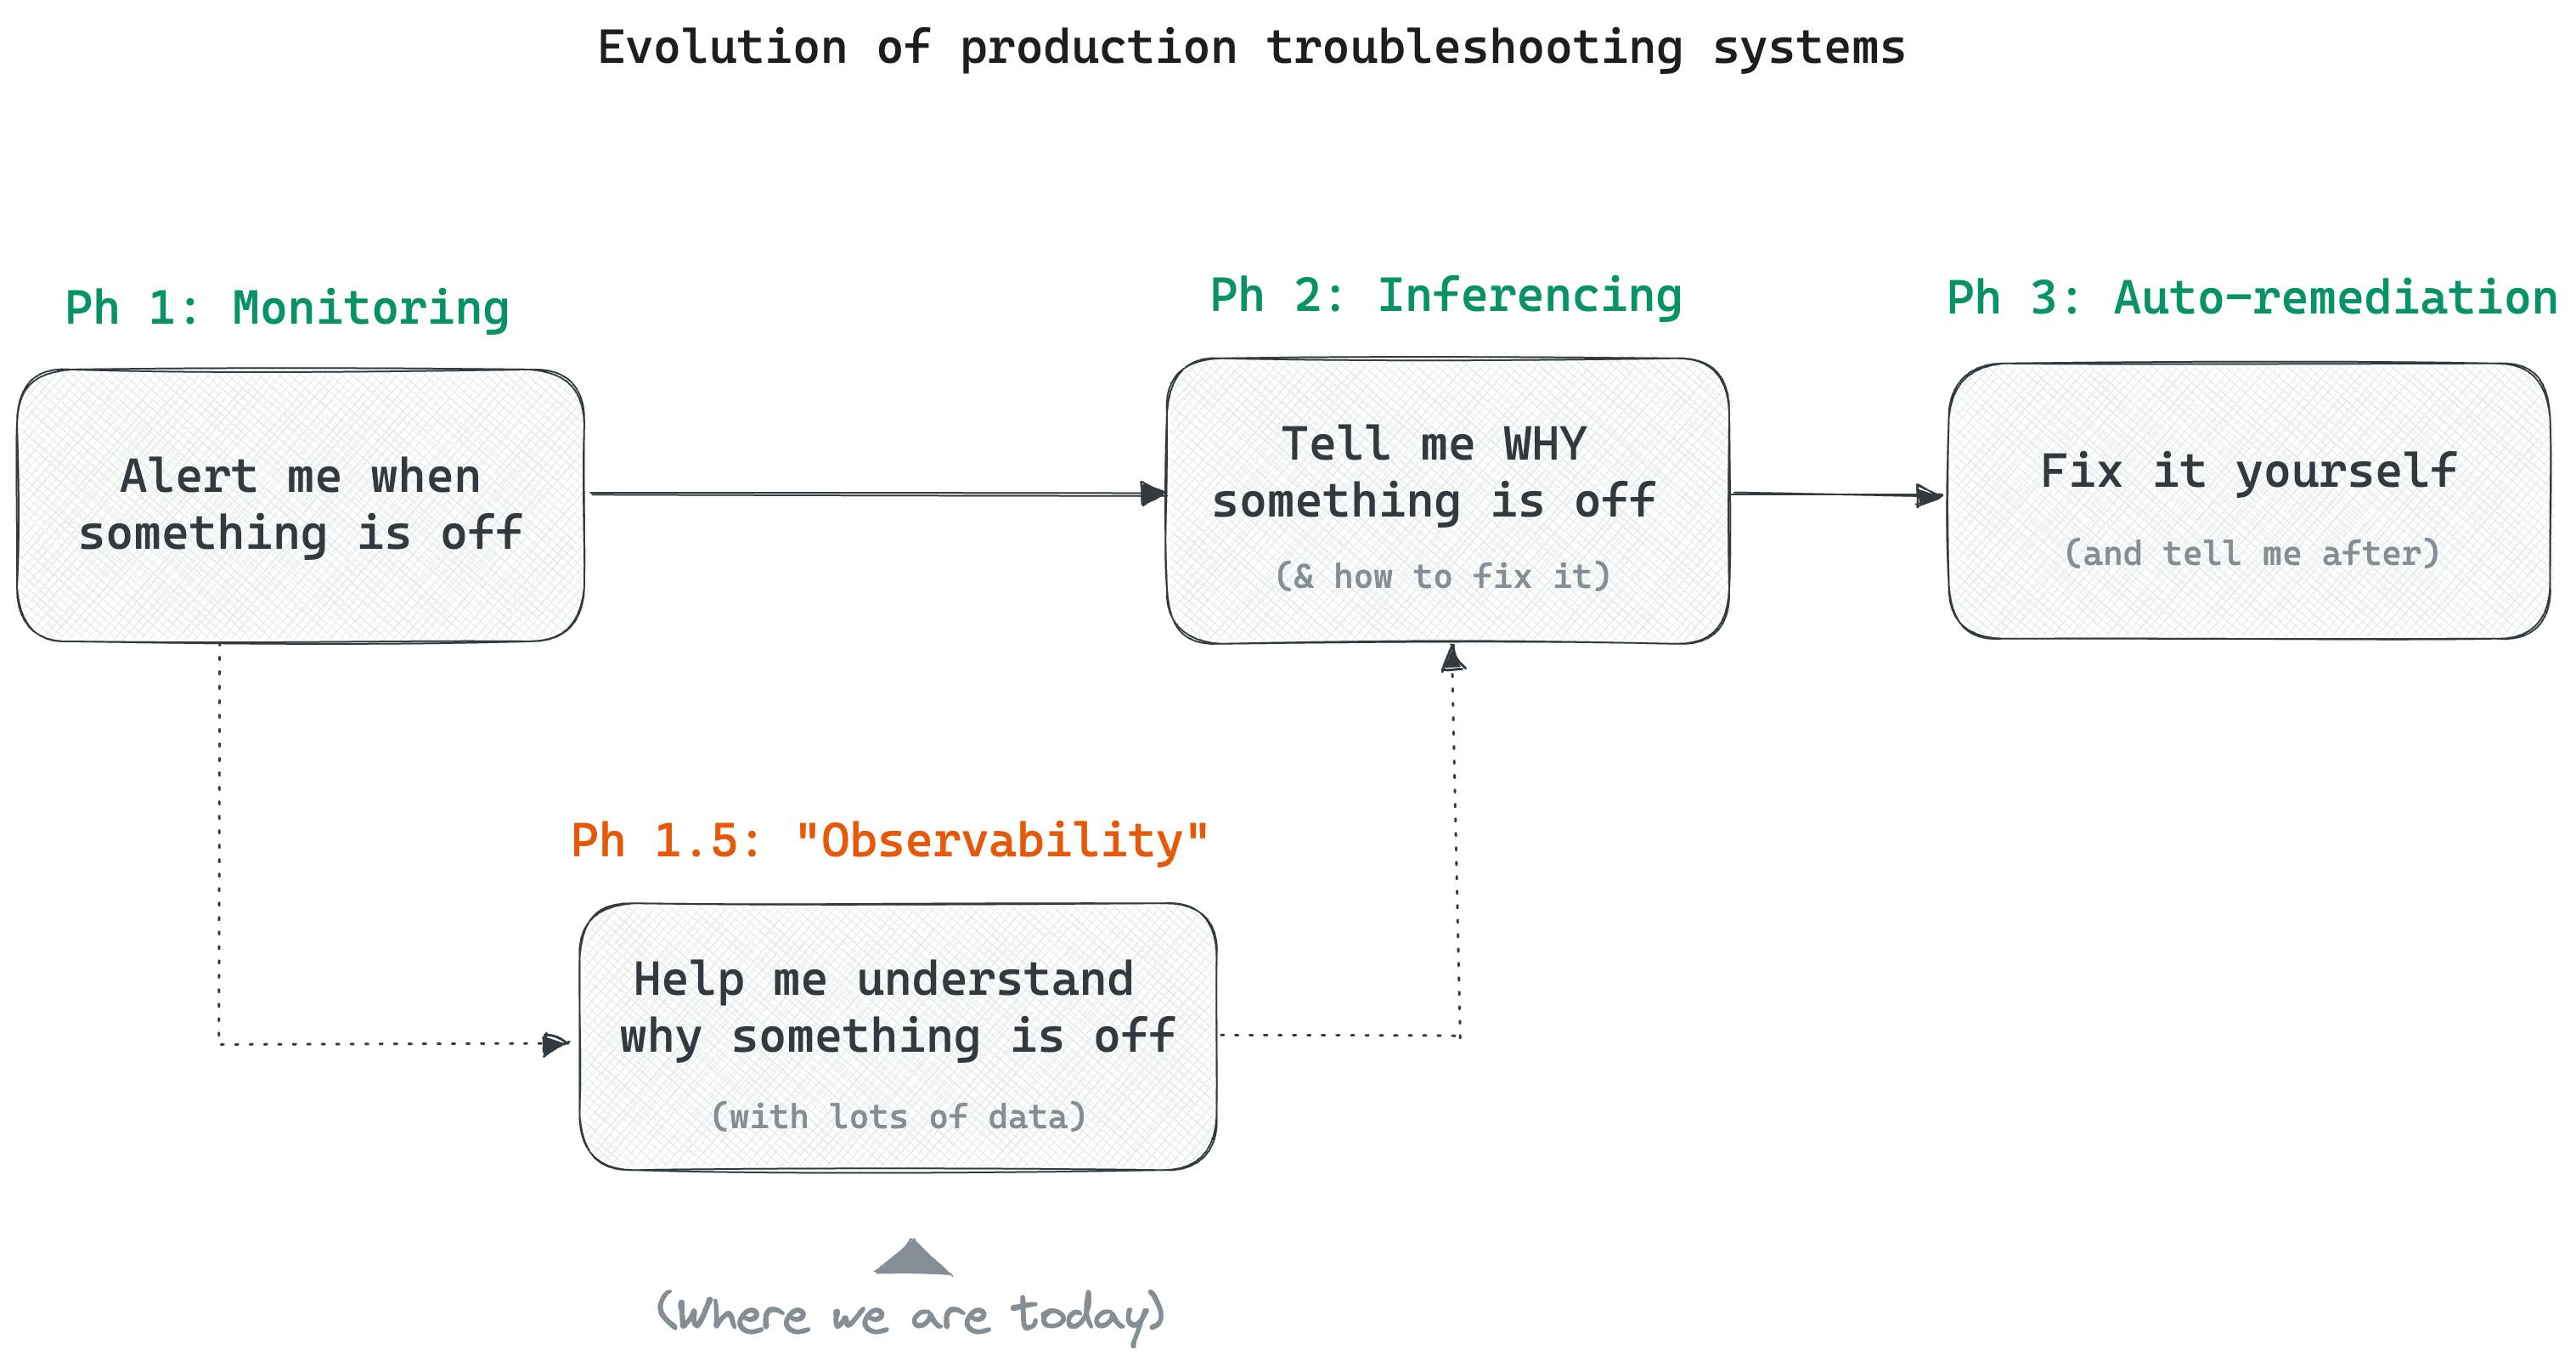 Monitoring, observability, and inferencing 